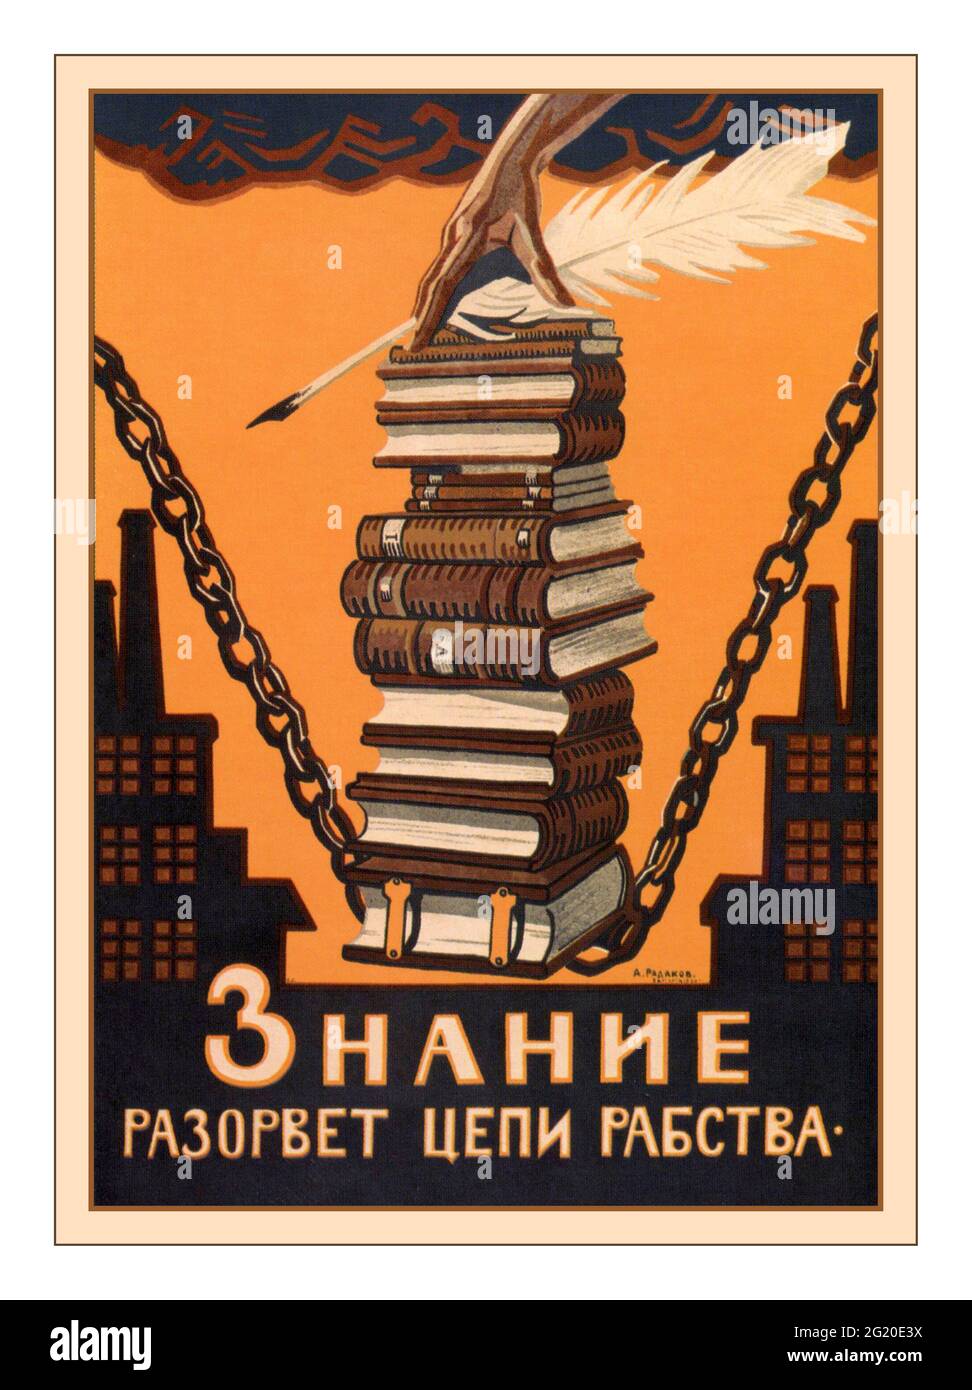 1920s Soviet USSR PROPAGANDA POSTER BOOKS PILE  [Knowledge will break the chains of slavery], a poster by Alexei Radakov (1872-1942). Published by GIZ, Petrograd, 1920. Books on a metal chain with hand holding a quill pen. Knowledge is power and freedom. Stock Photo